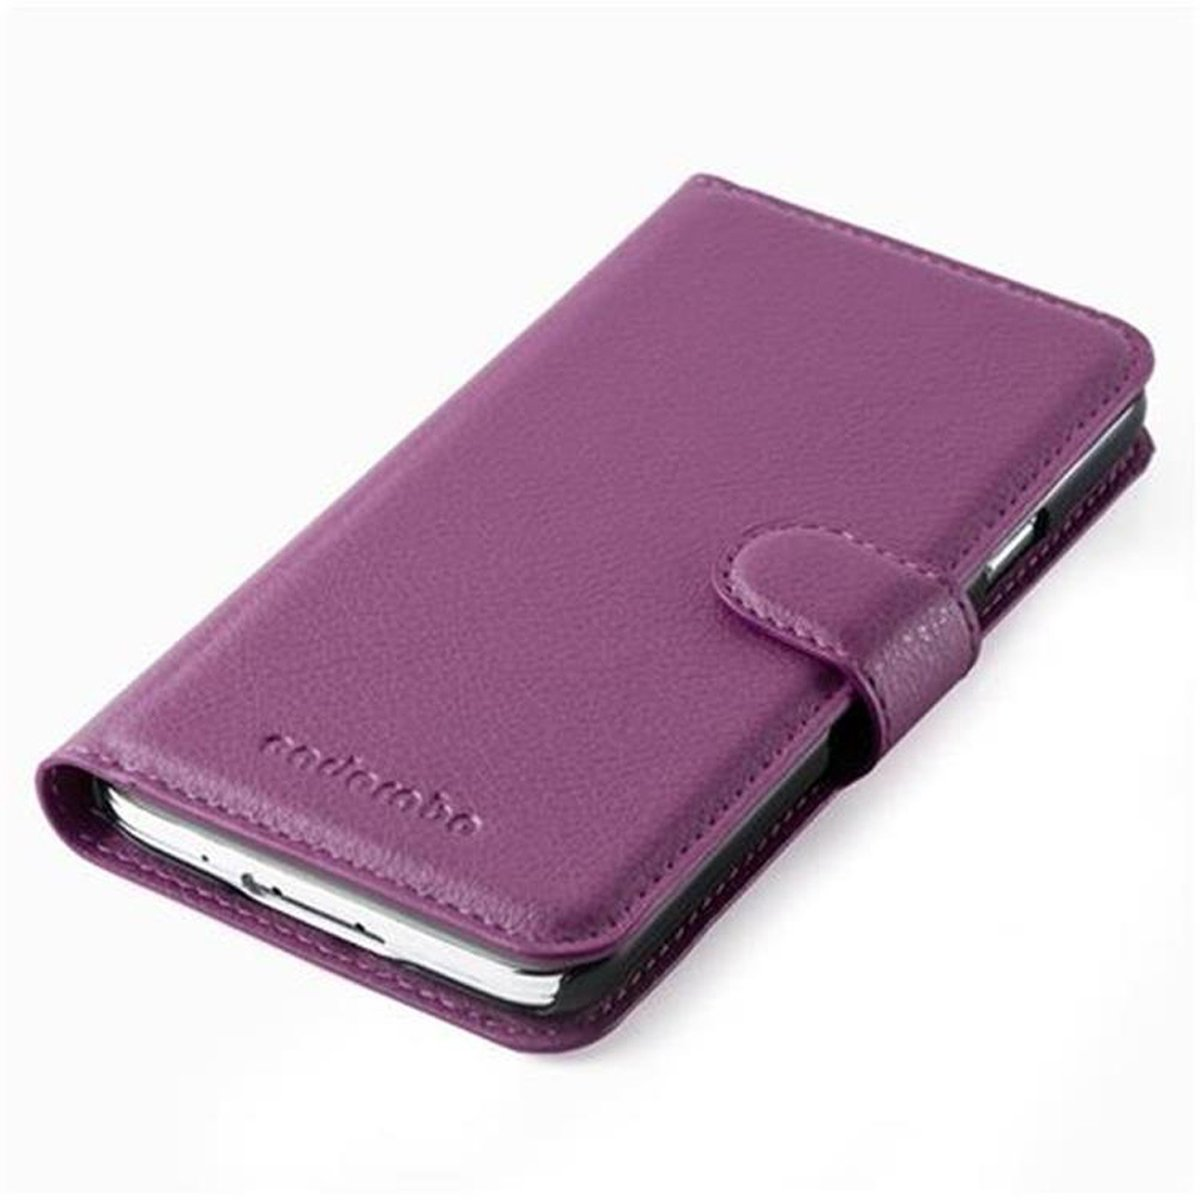 Standfunktion, S5 NEO, CADORABO MANGAN Galaxy VIOLETT / Samsung, Hülle S5 Book Bookcover,